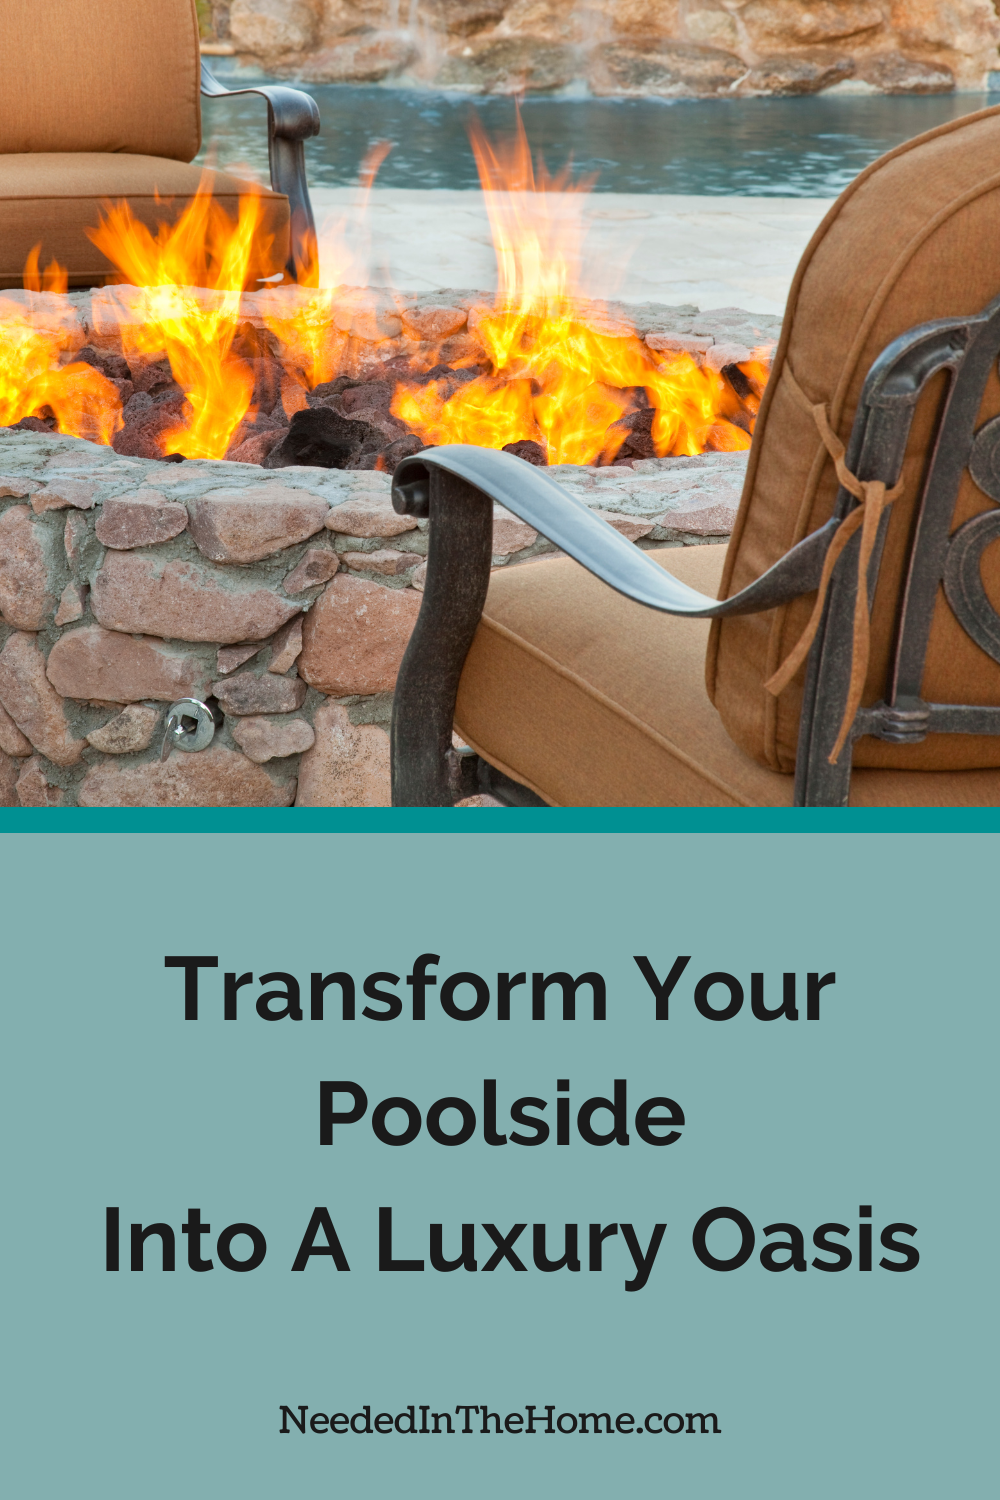 deck chairs firepit with fire next to pool with rock landscaping transform your poolside into a luxury oasis neededinthehome